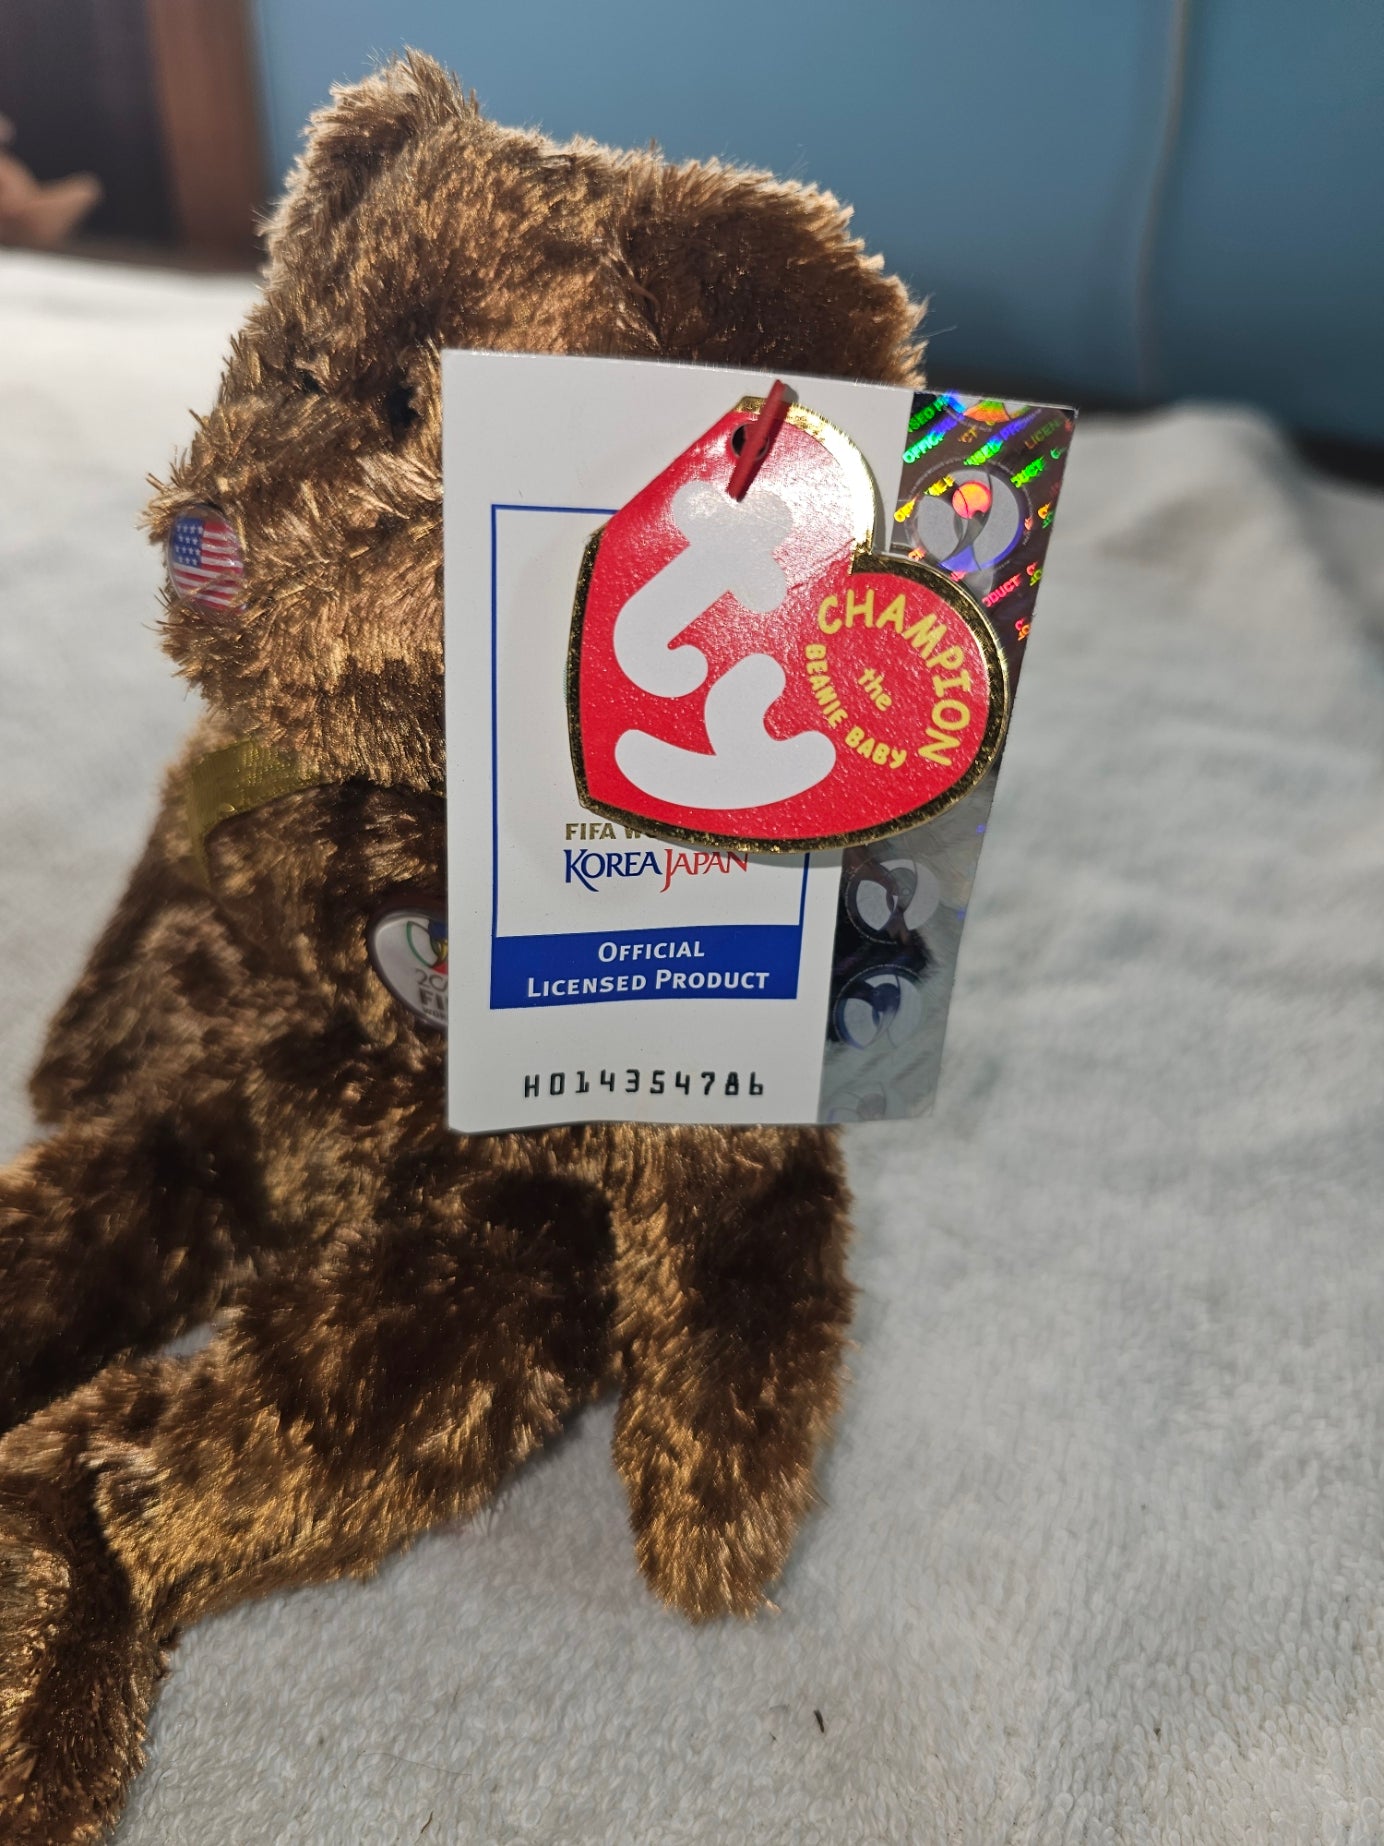 2002 TY Vintage & Retired “US Champion FIFA Beanie Baby